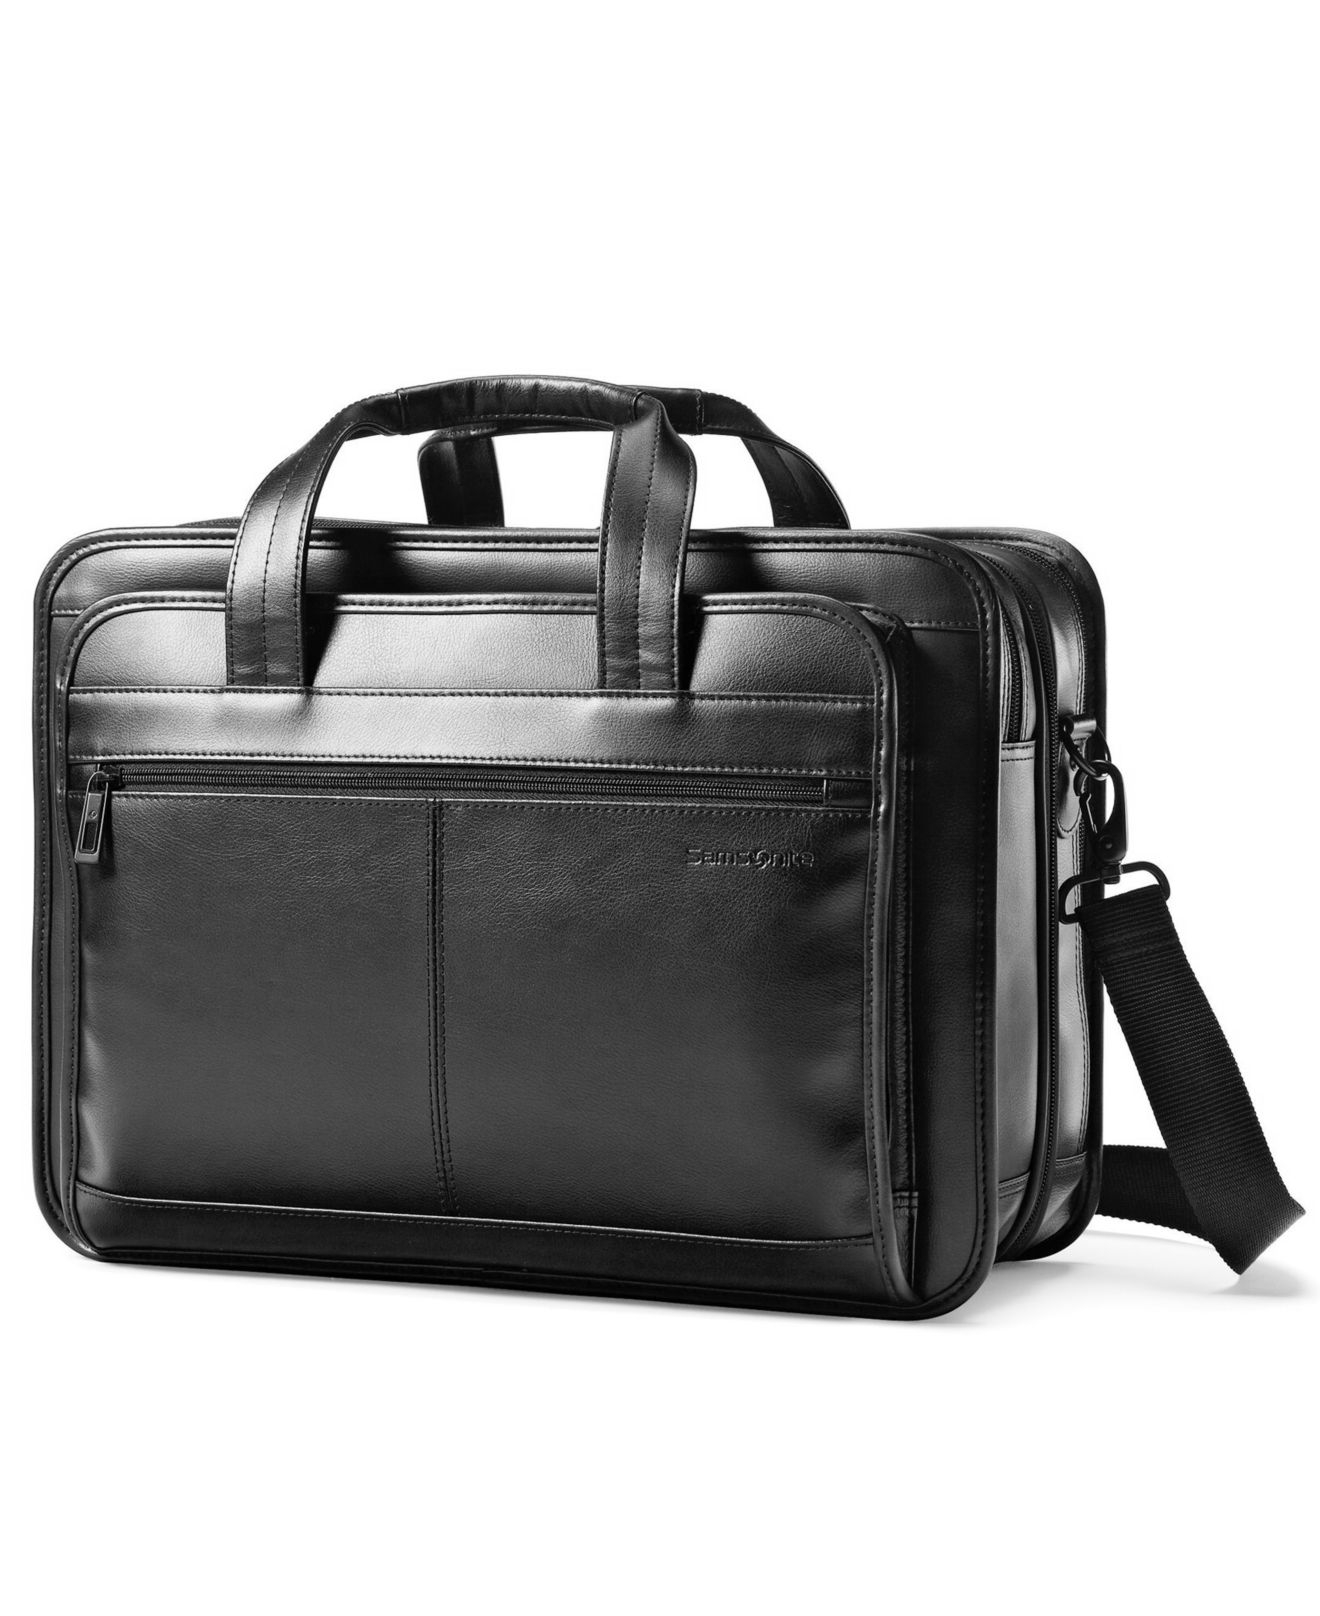 Samsonite Leather Expandable Laptop Briefcase in Black for Men - Save